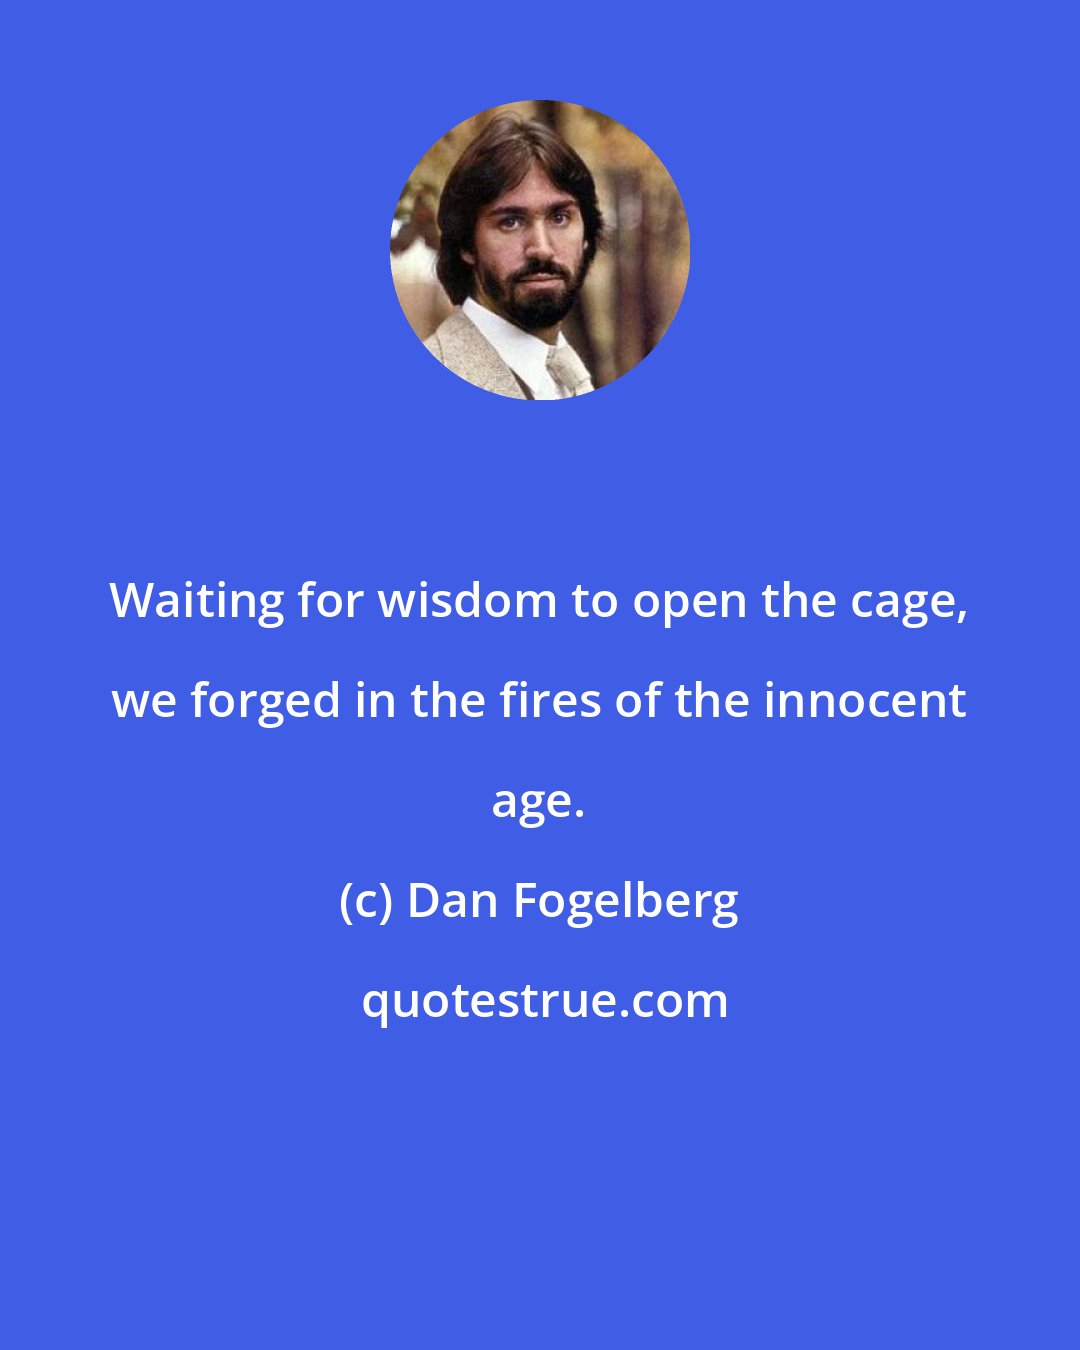 Dan Fogelberg: Waiting for wisdom to open the cage, we forged in the fires of the innocent age.